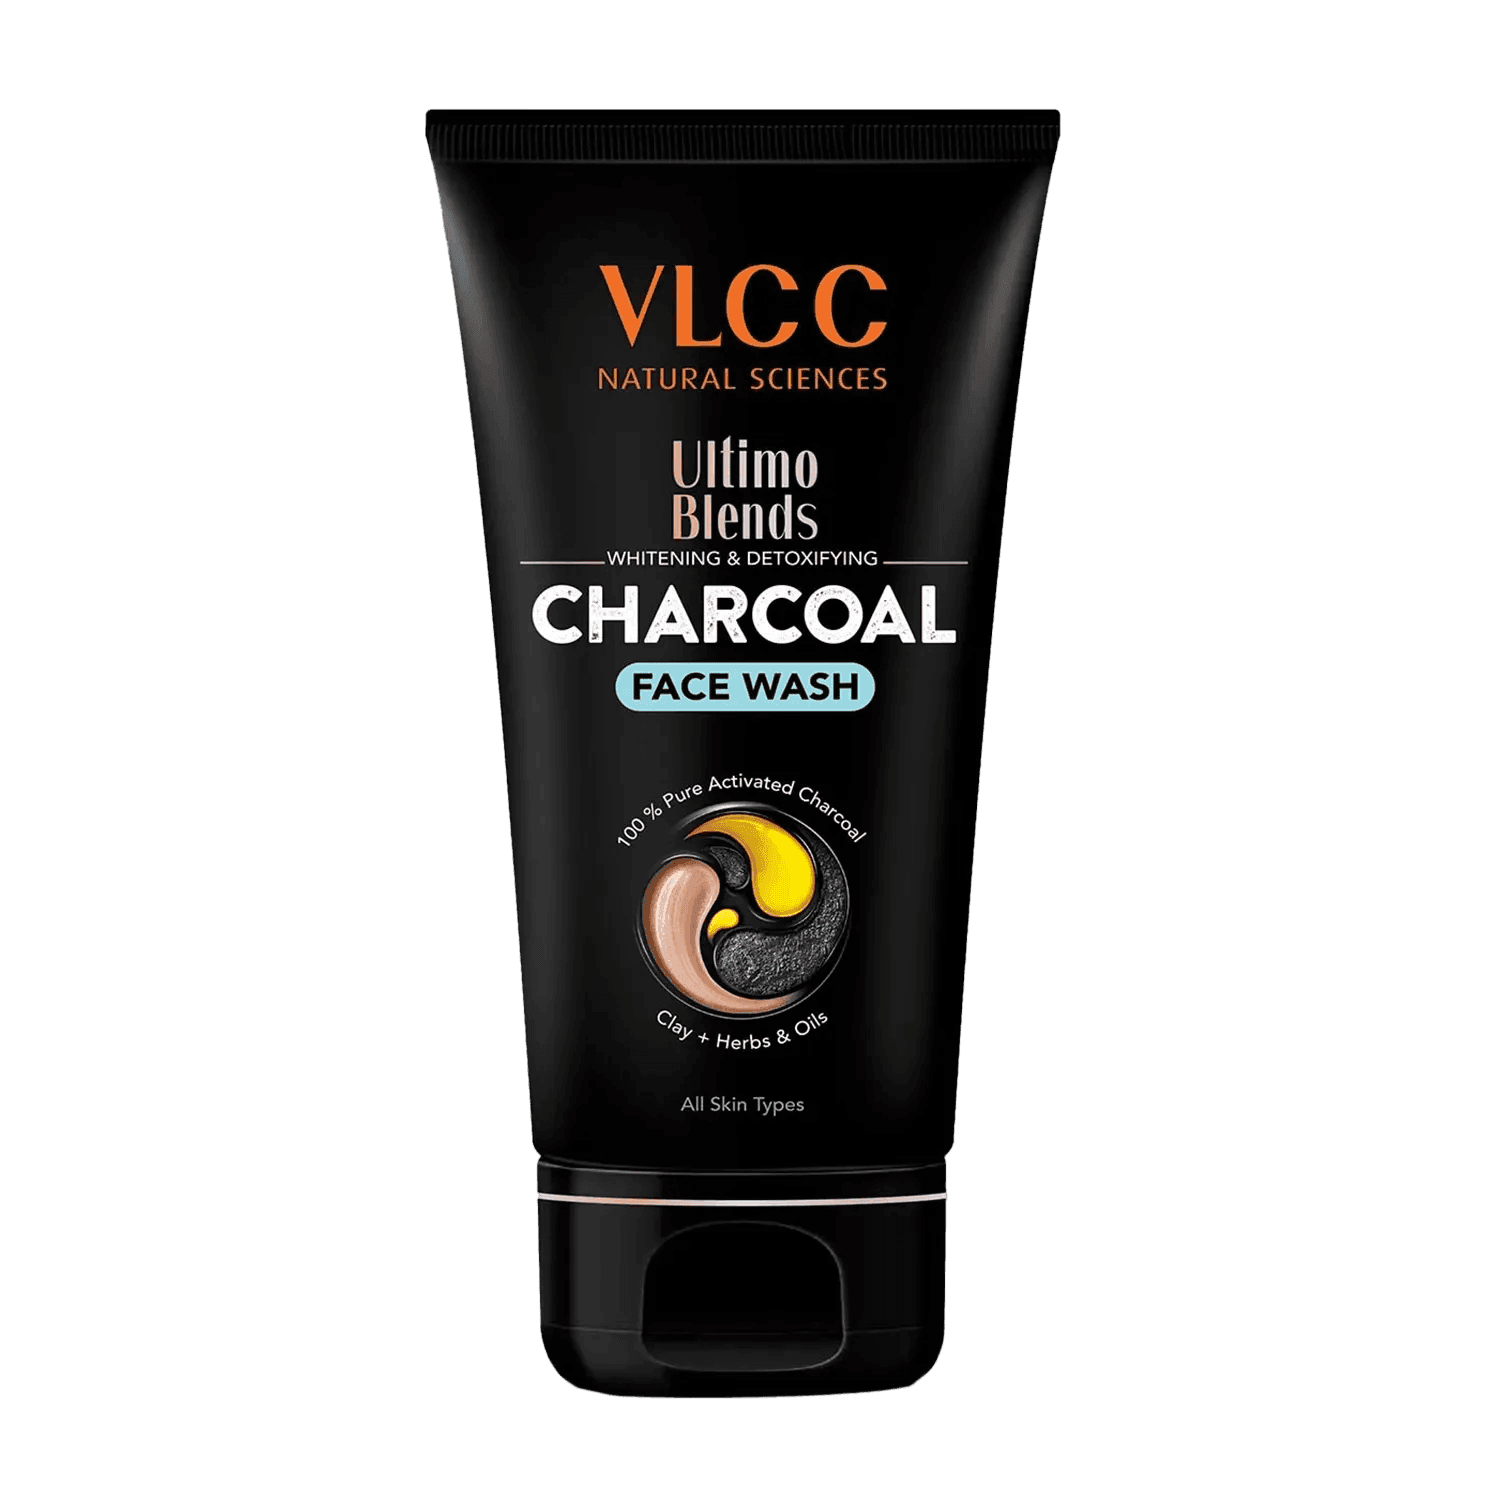 VLCC Ultimo Blends Charcoal Face Wash (100g)